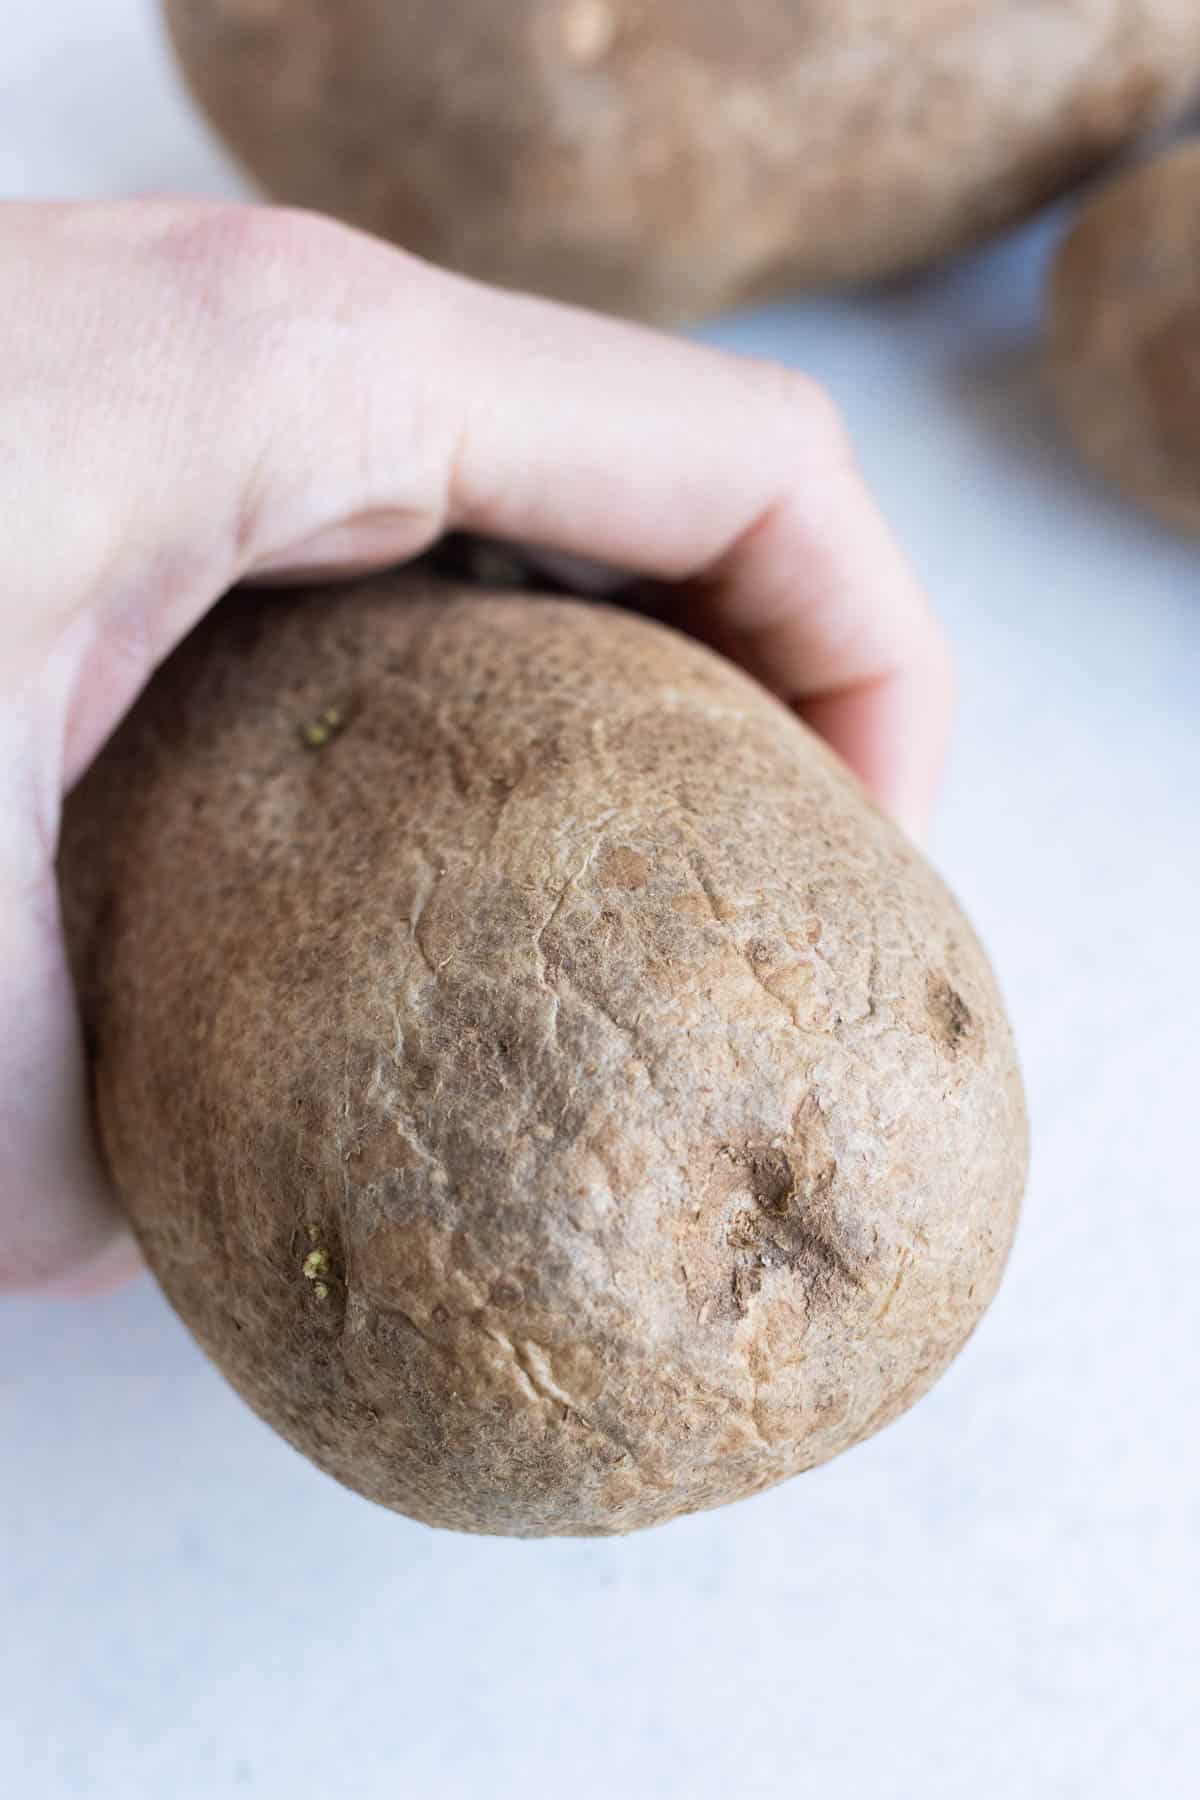 Someone holding a potato with marks and dark spots.